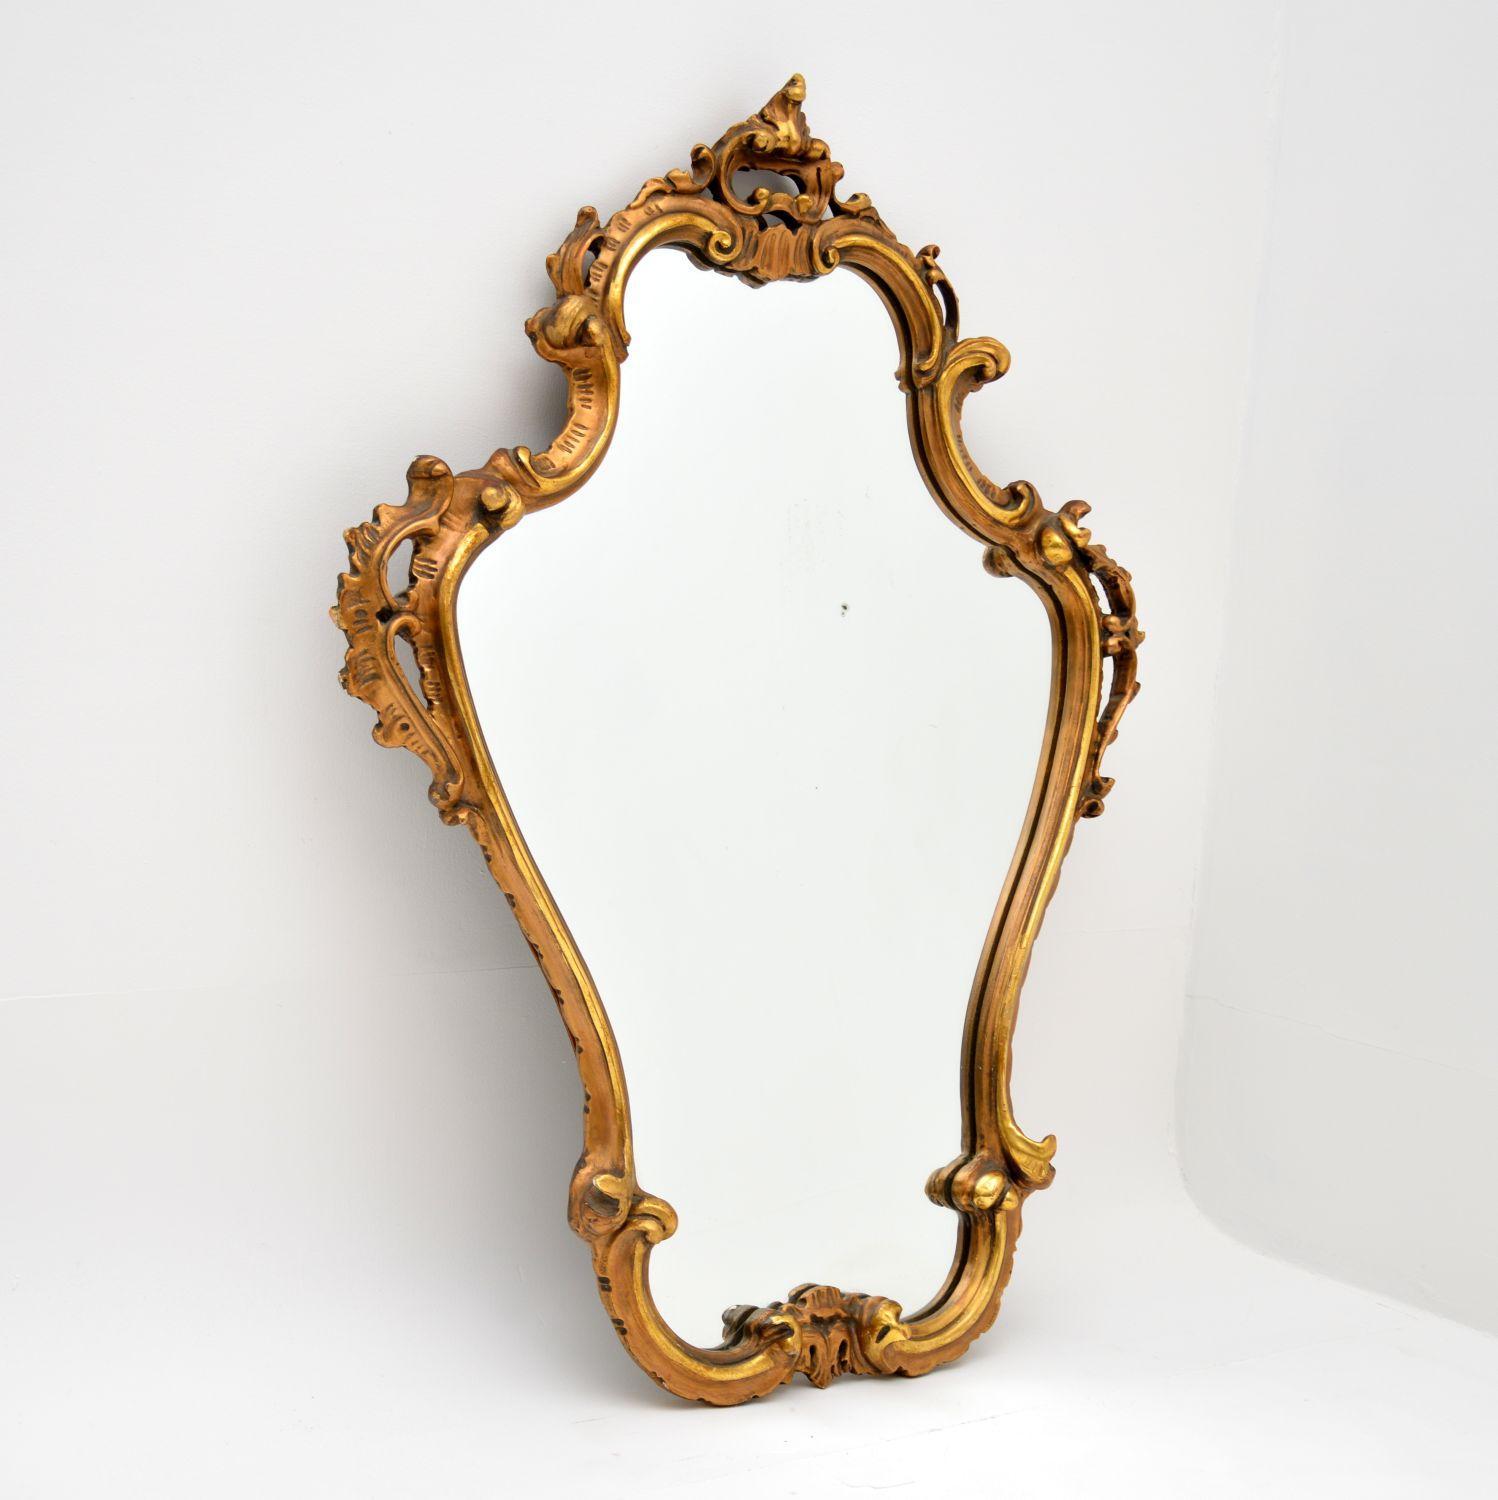 A stunning vintage gilt wood mirror in the antique Italian style. This dates from around the 1950’s.

It is well made and has a beautiful design. There is some minor wear to the frame and some very small areas of distress to the silvered backing